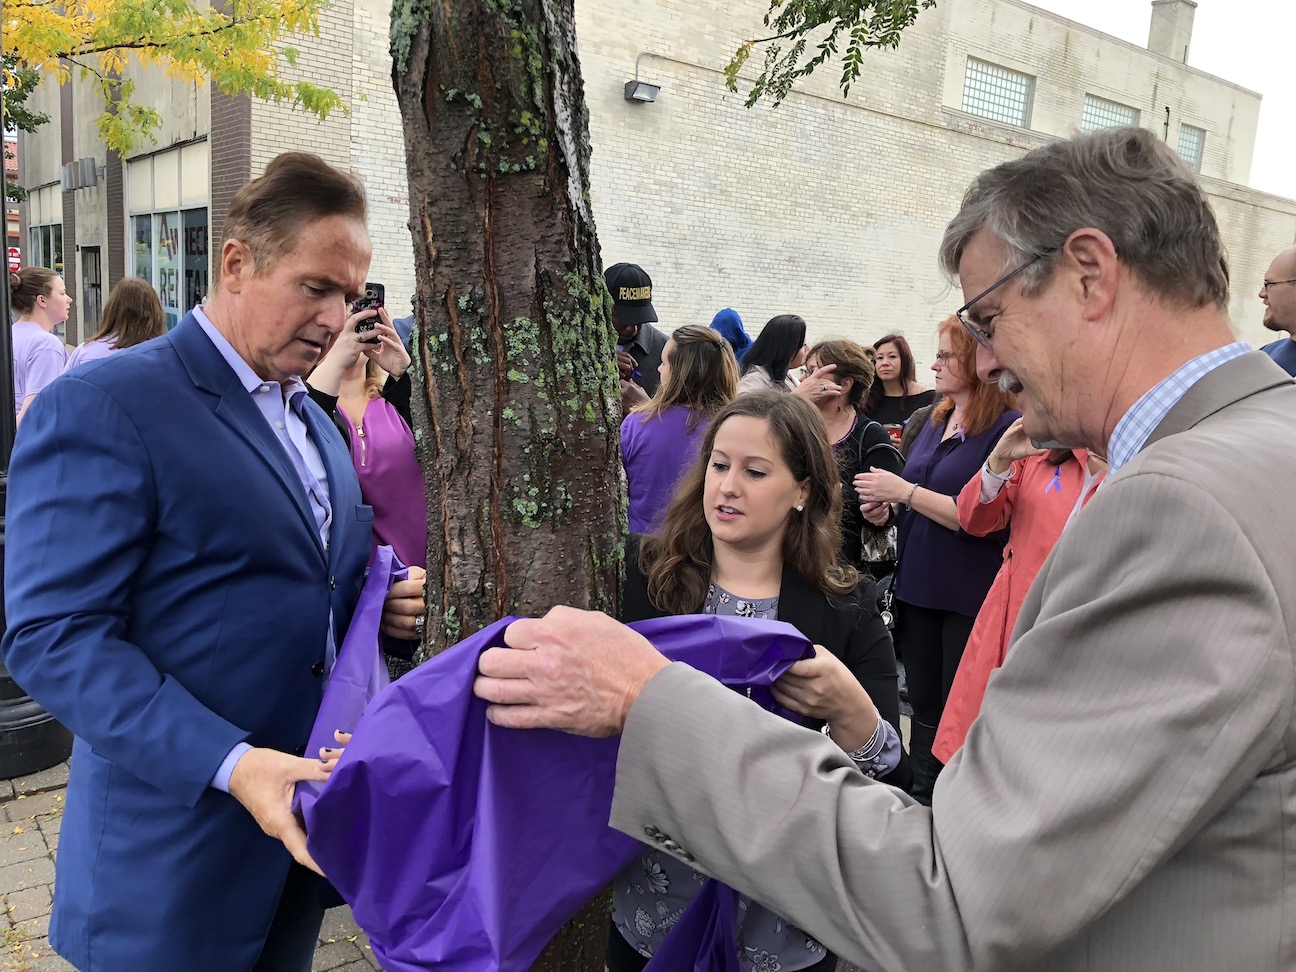 Passage House Director Larissa Bachman helps Congressman Brian Higgins and Niagara Falls Mayor Paul Dyster tie a purple ribbon around a tree on Third Street. The marker is to raise awareness about domestic violence. (Photos by Joshua Maloni)